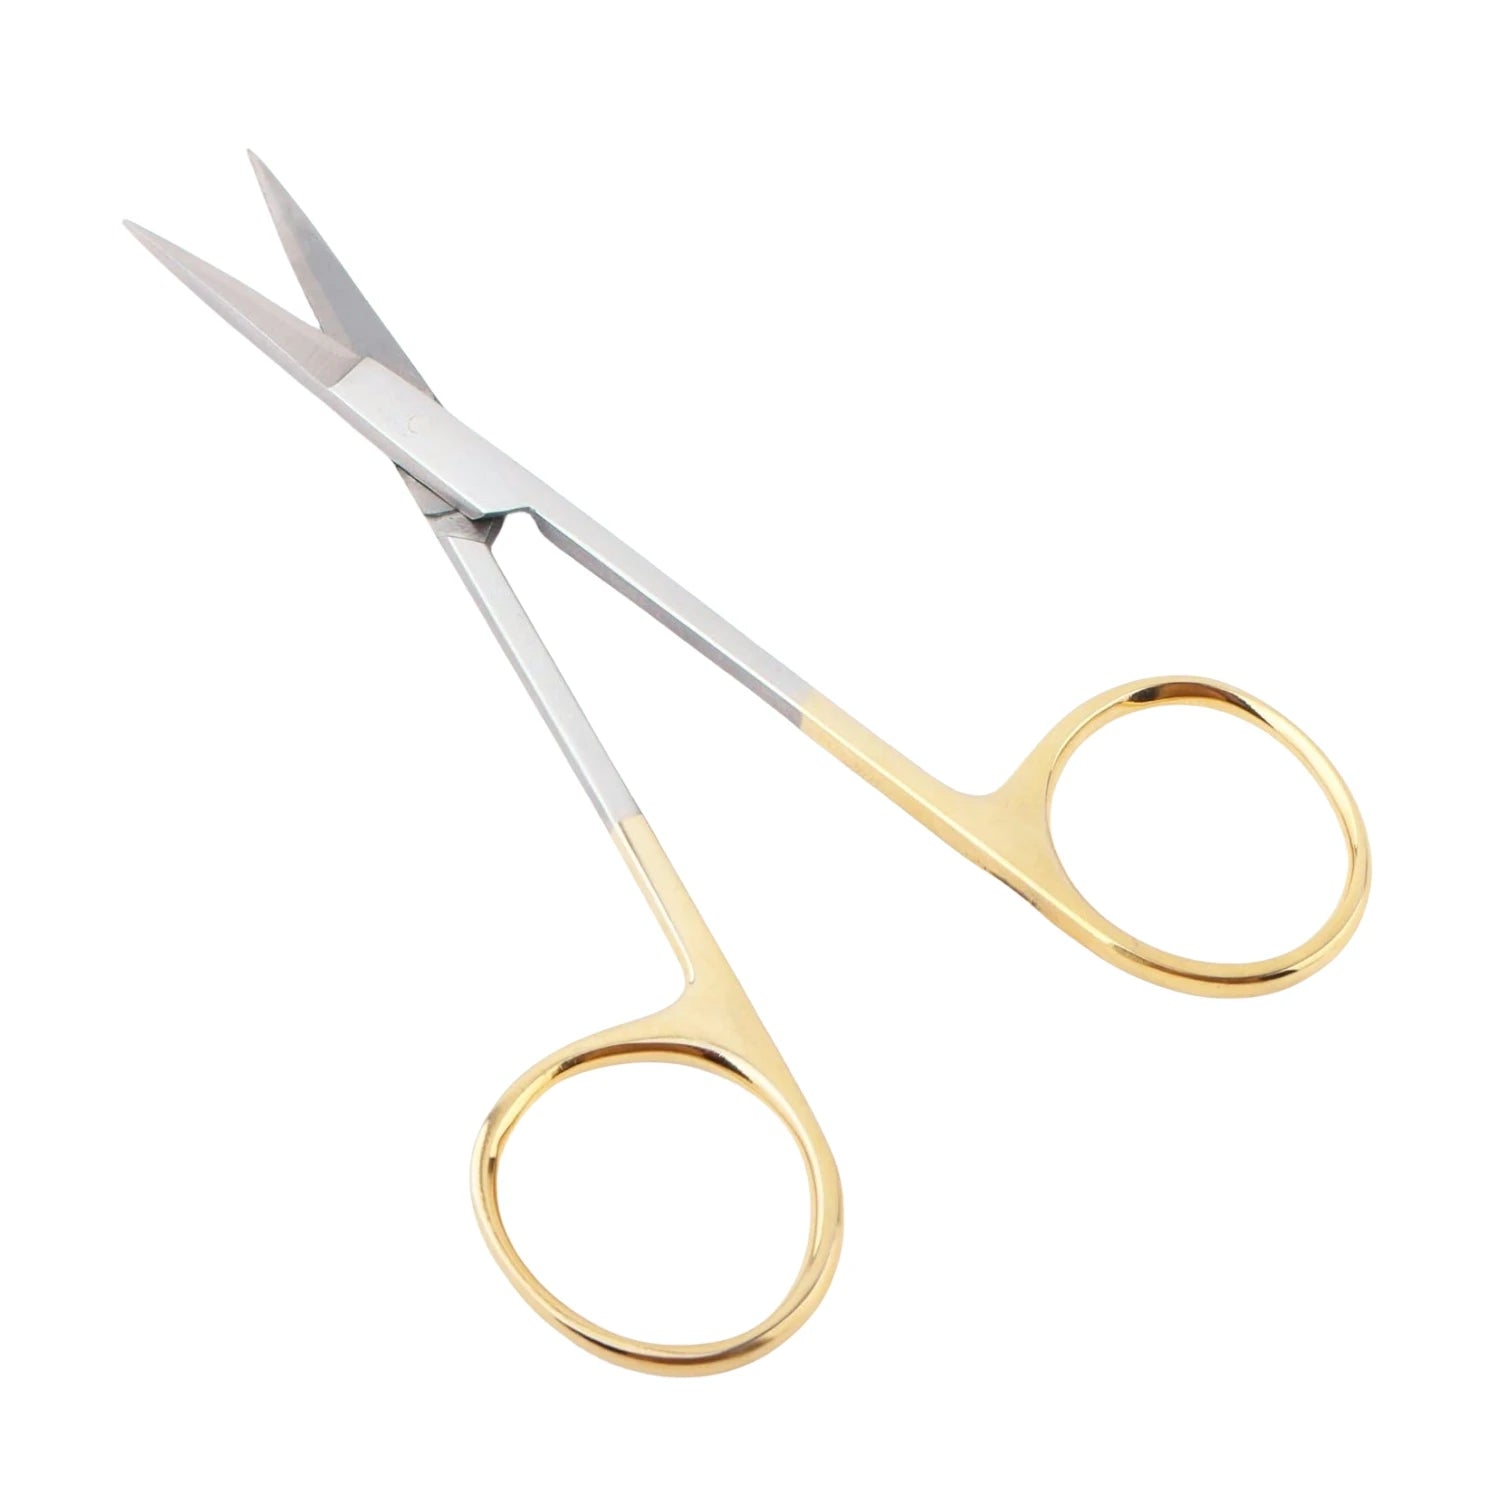  surgical scissors curved & straight